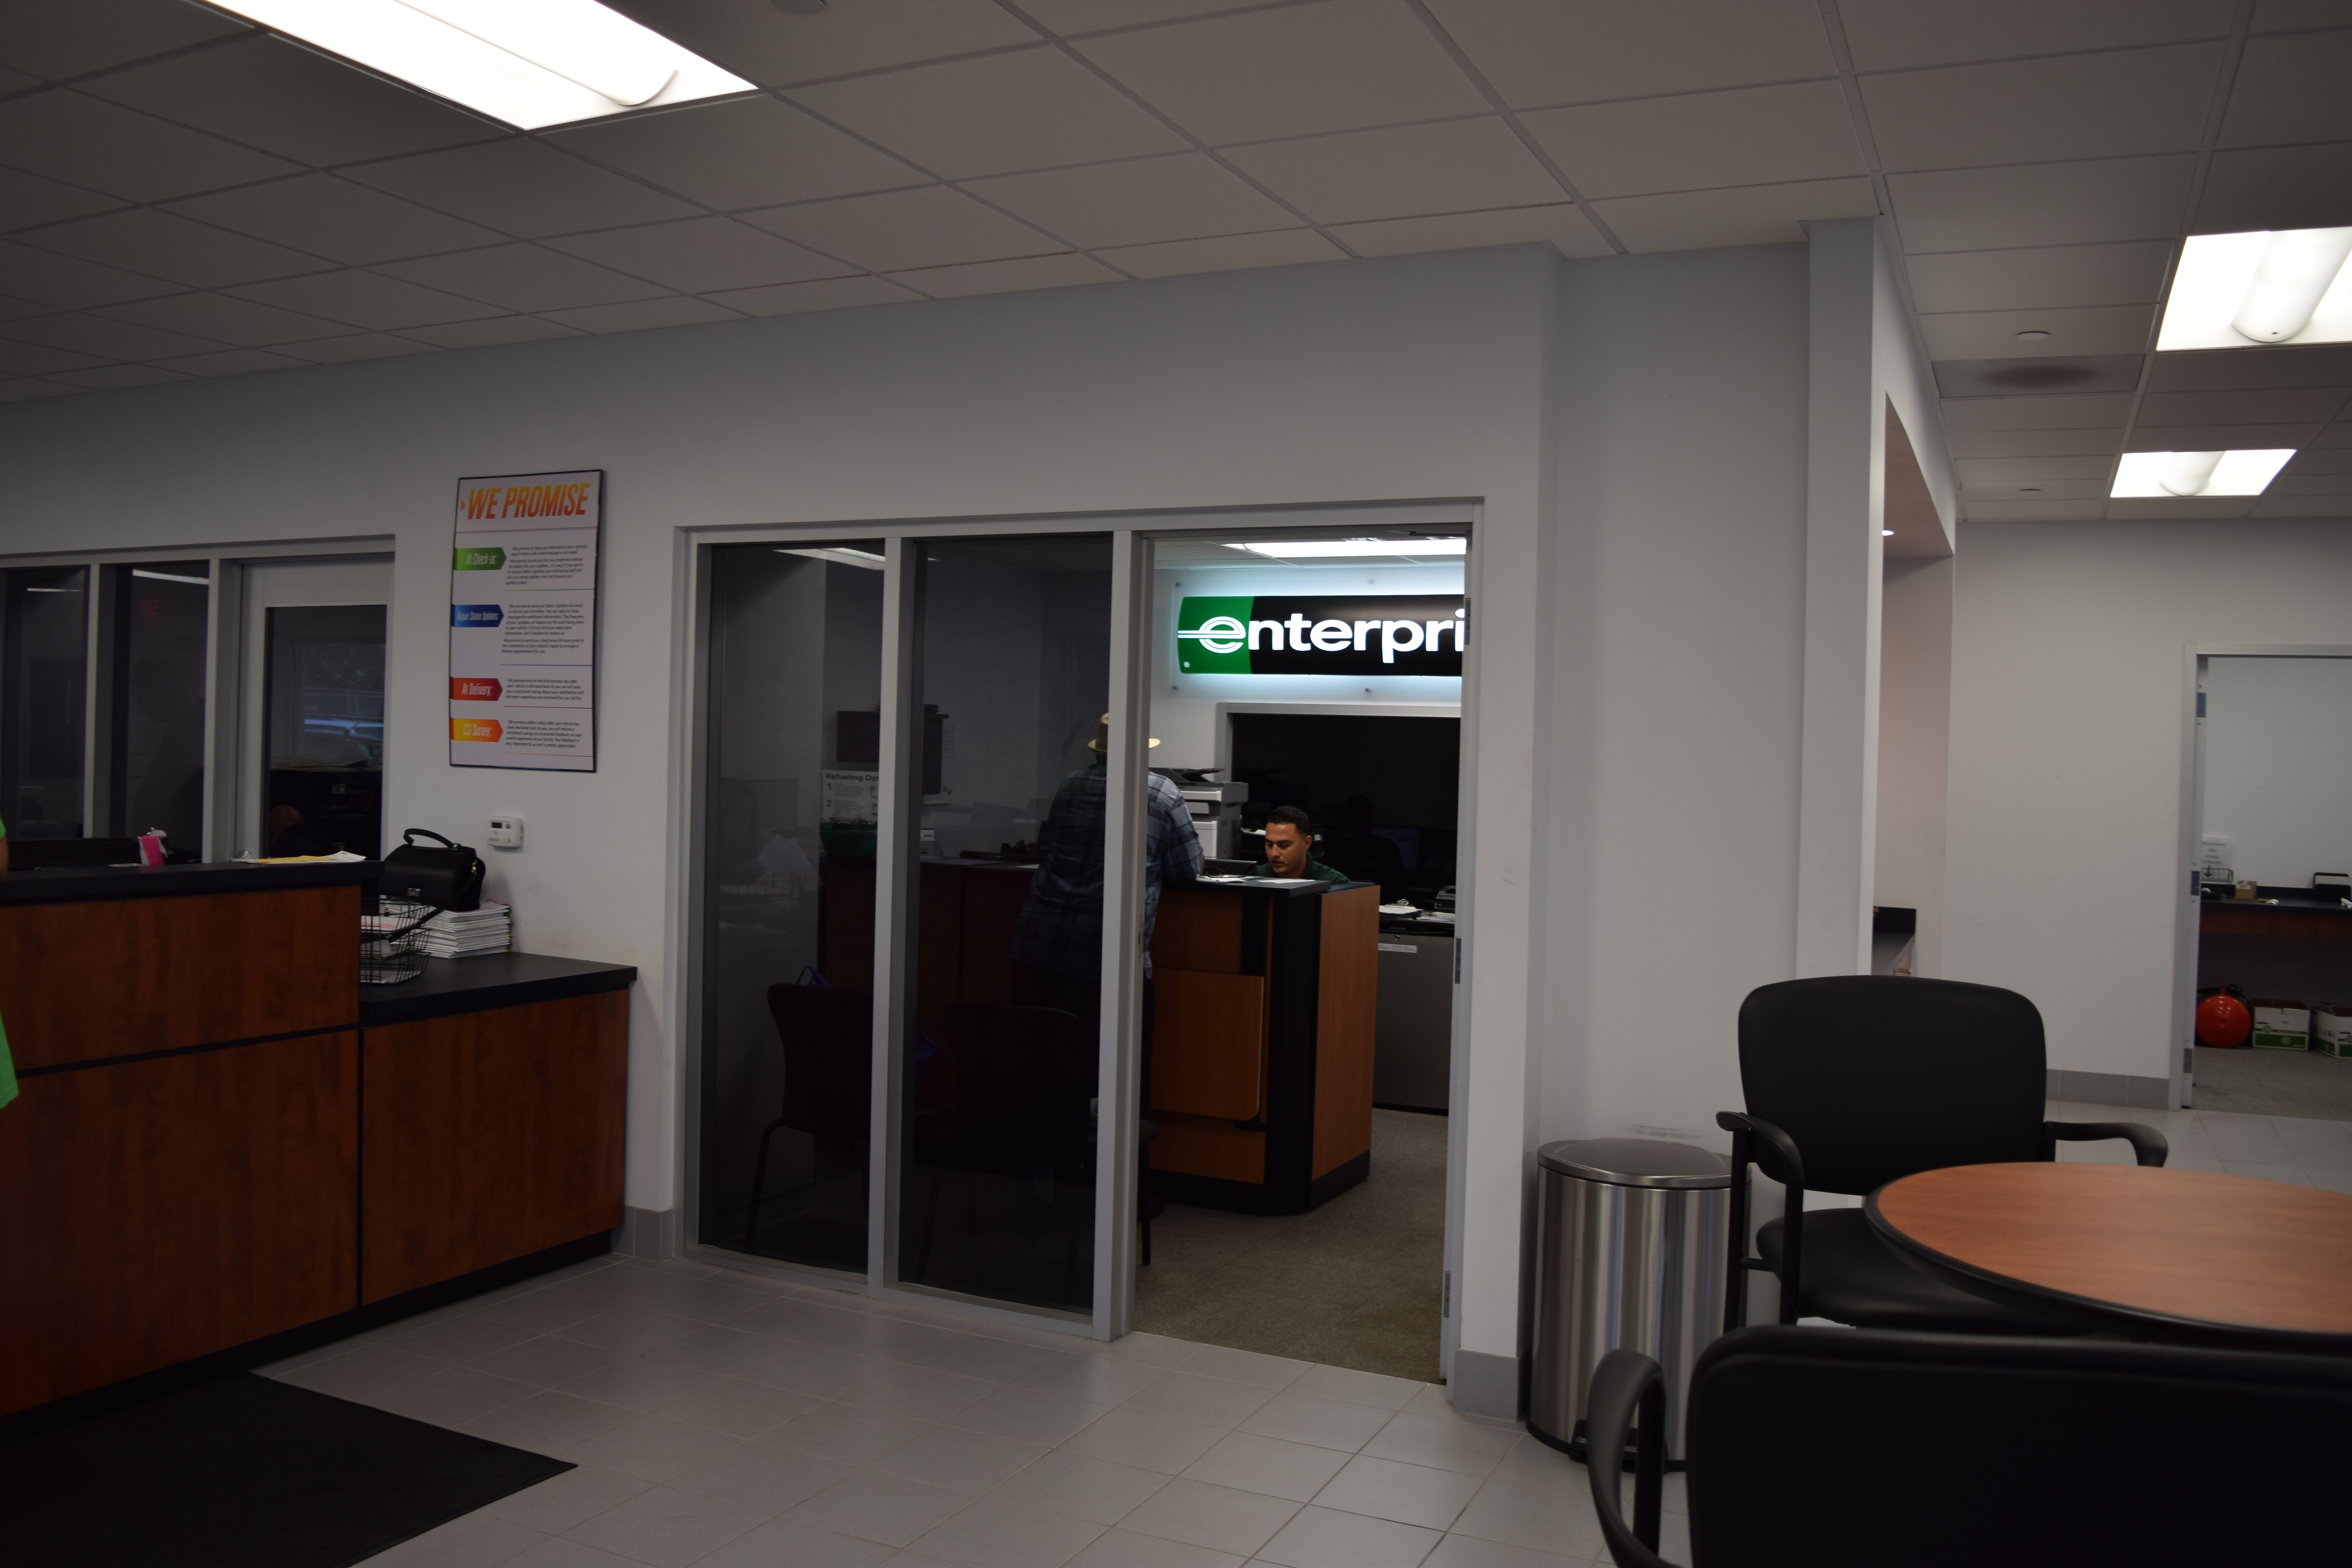 Sterling McCall Nissan Collision Center of Stafford Photo